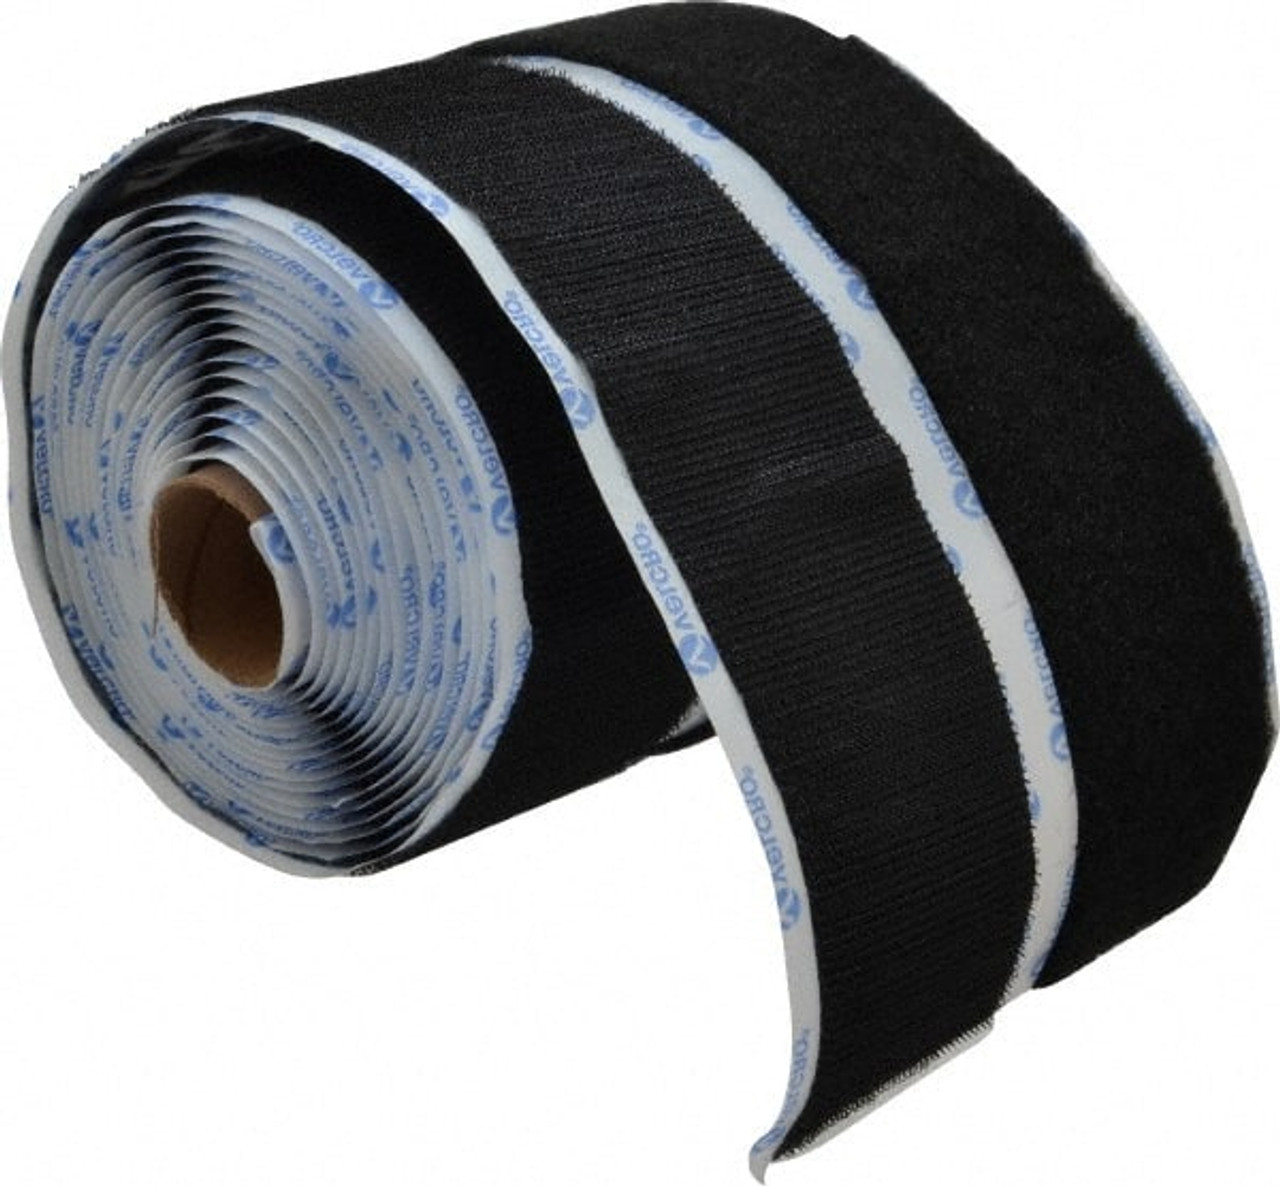 Velcro 2 x 5 Yd Adhesive Backed Hook & Loop Roll Continuous Roll